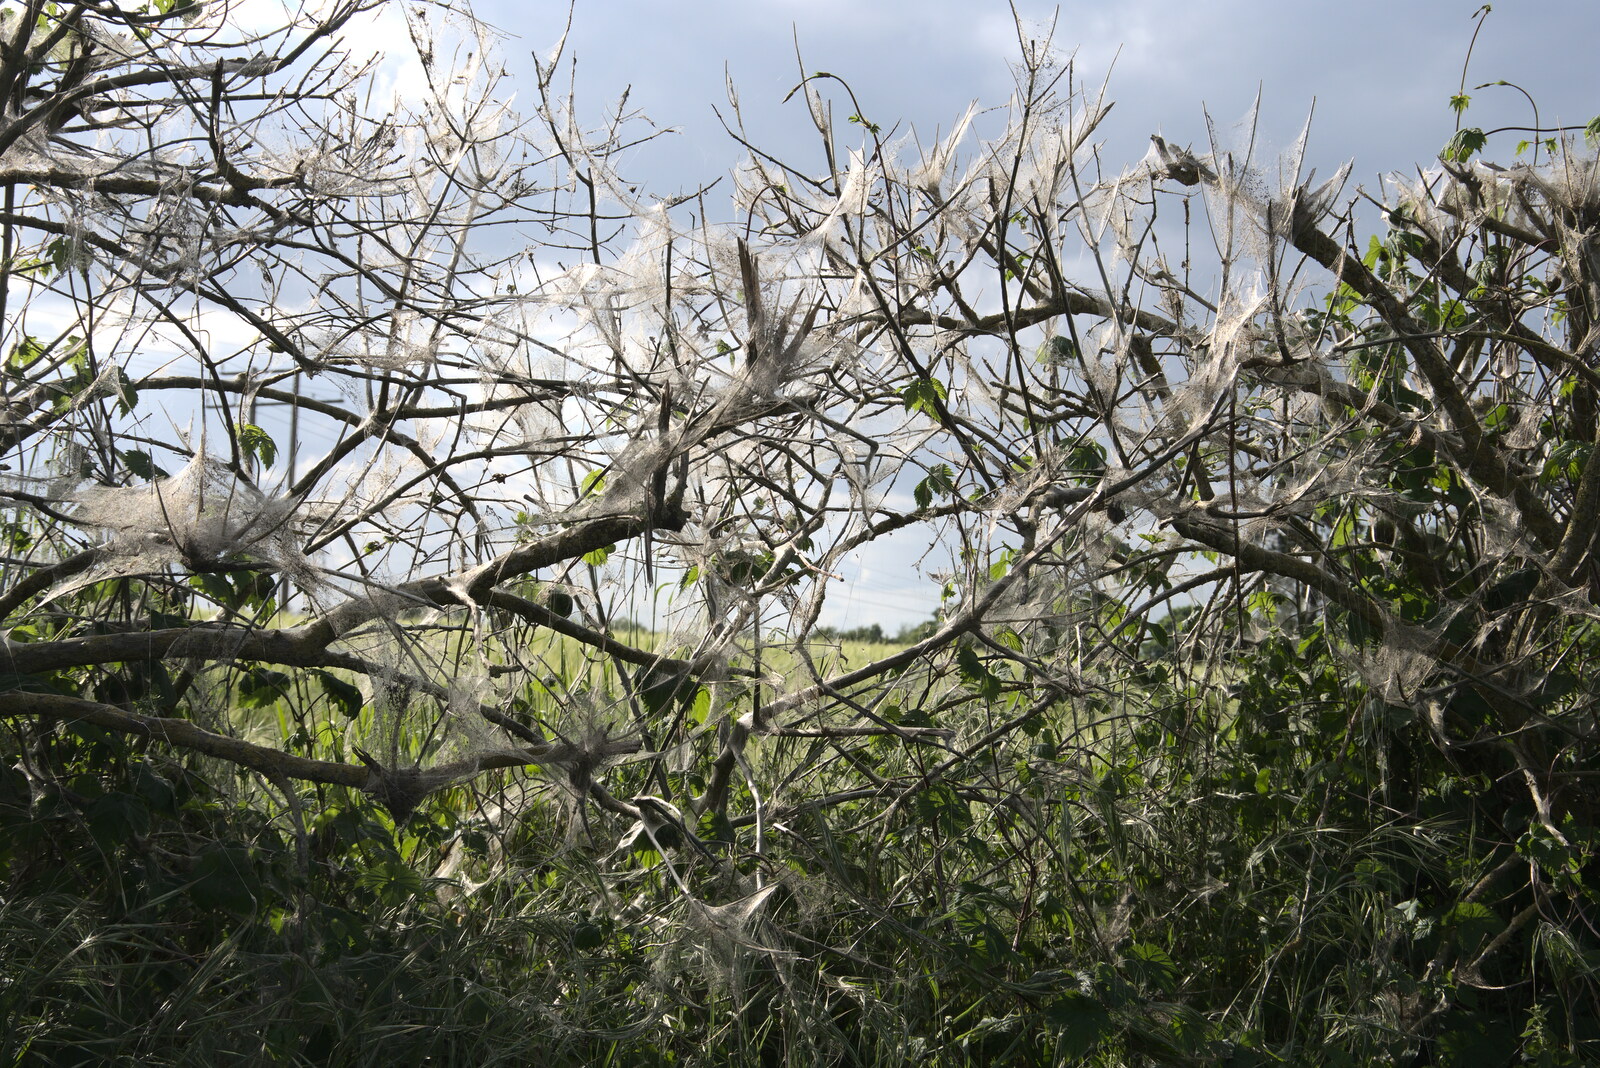 The hedges are covered in caterpillar webs from A Moth Infestation and a Trip to the Zoo, Banham, Norfolk - 21st May 2022